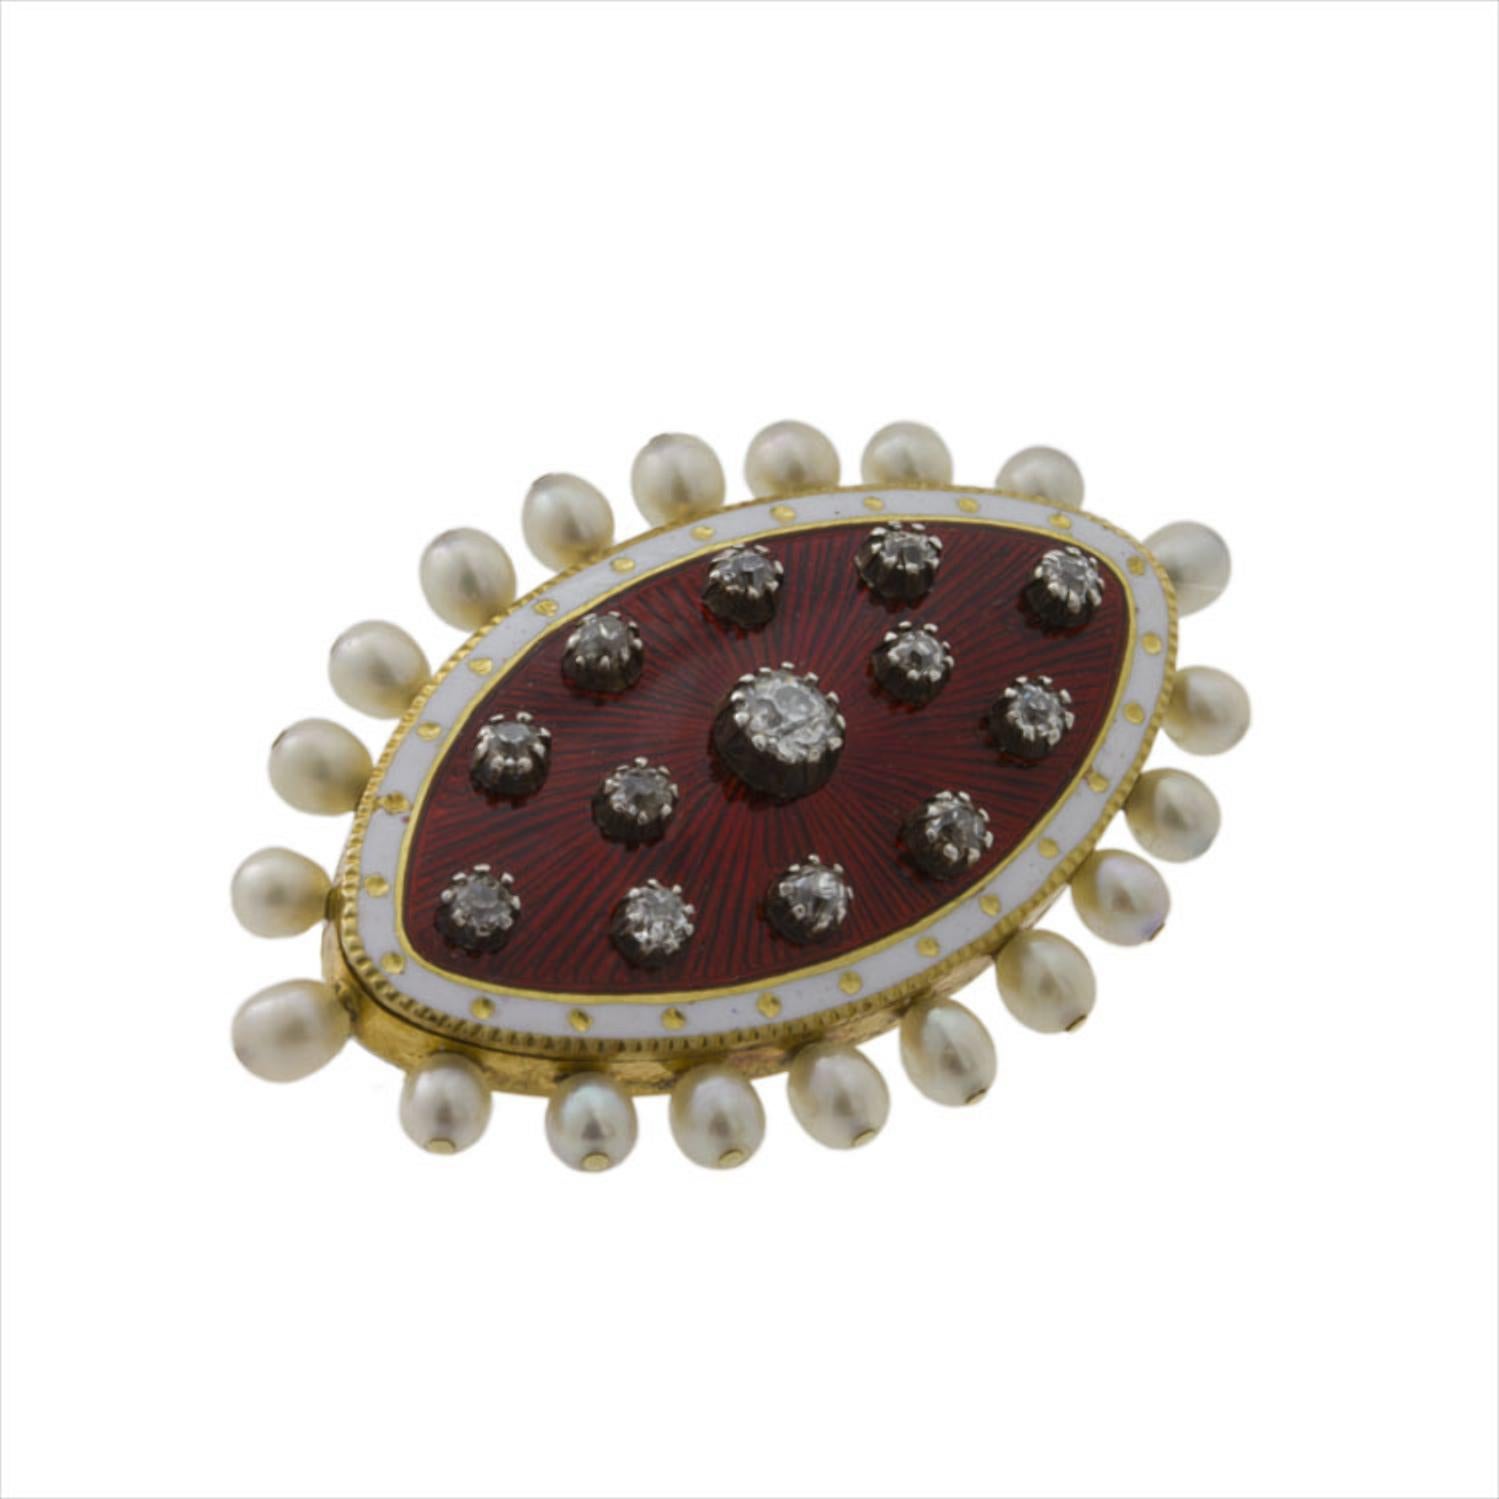 A late Victorian red enamel lozenge-shaped brooch, thirteen old-cut diamonds  set on silver cut-down settings to a red background, surrounded by a white enamel boarder to a pearl surround, all to a yellow gold mount, circa 1880, measuring